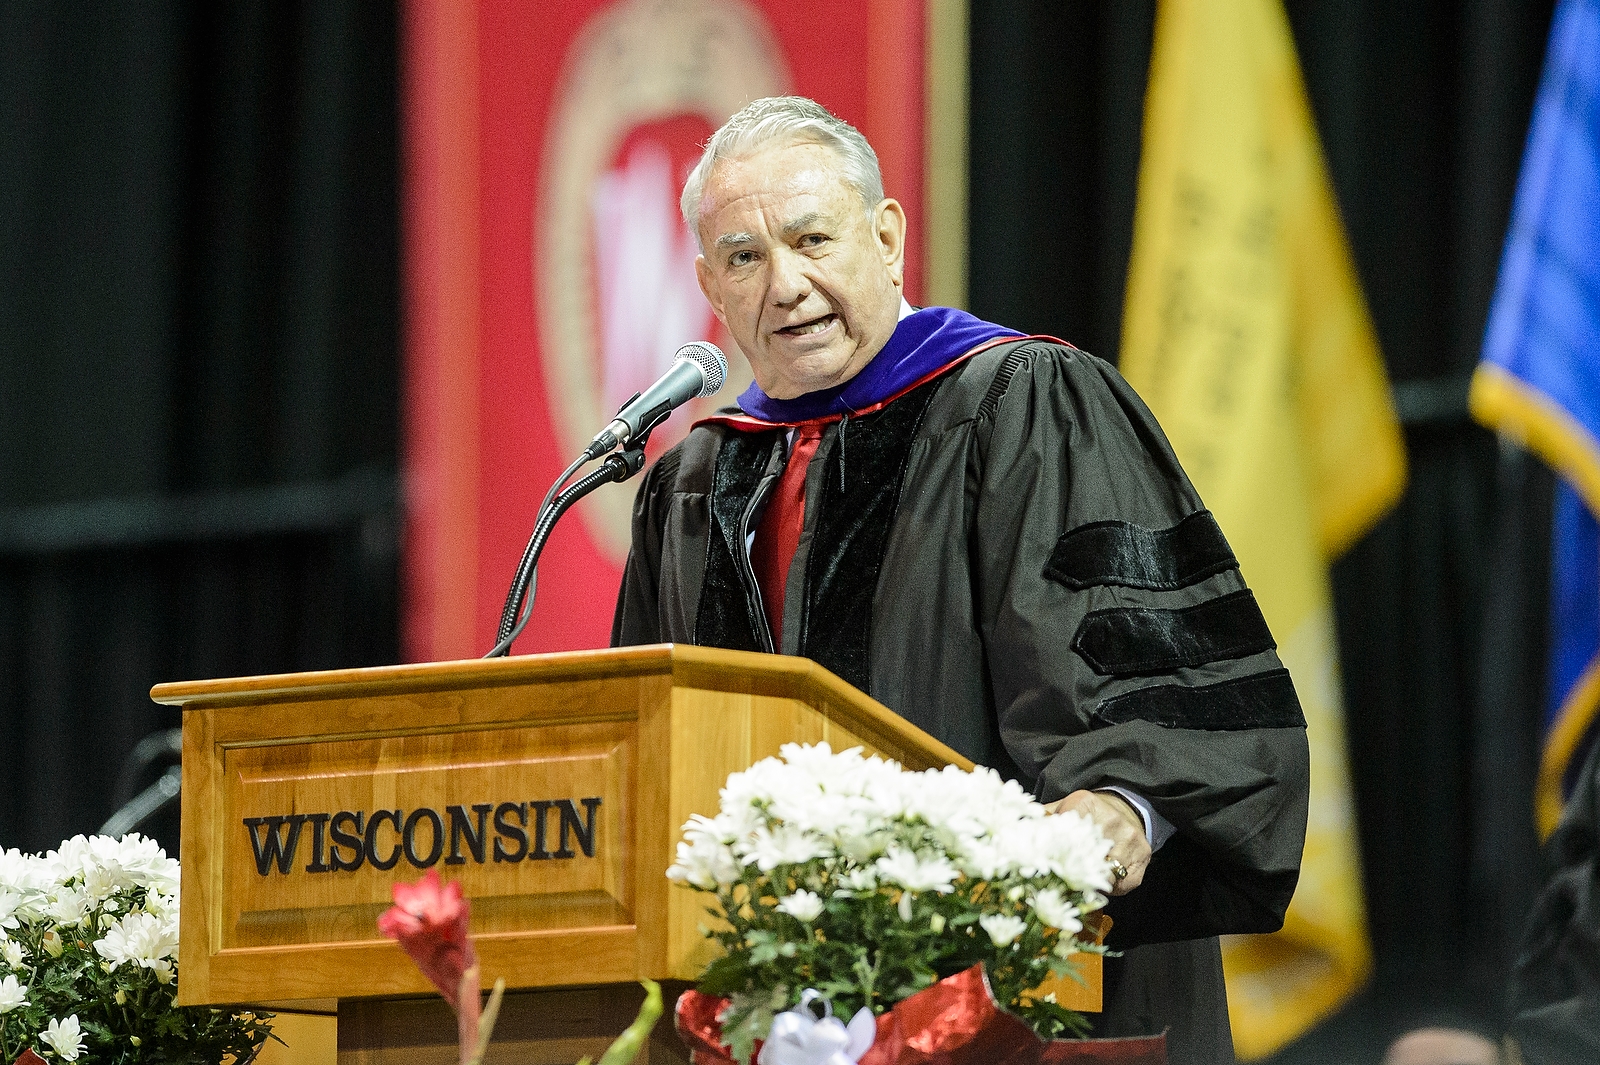 “Do something you want to do. Life is too short to be at a job you don’t like. Find your passion and follow it," former Gov. Tommy Thompson told the graduates.